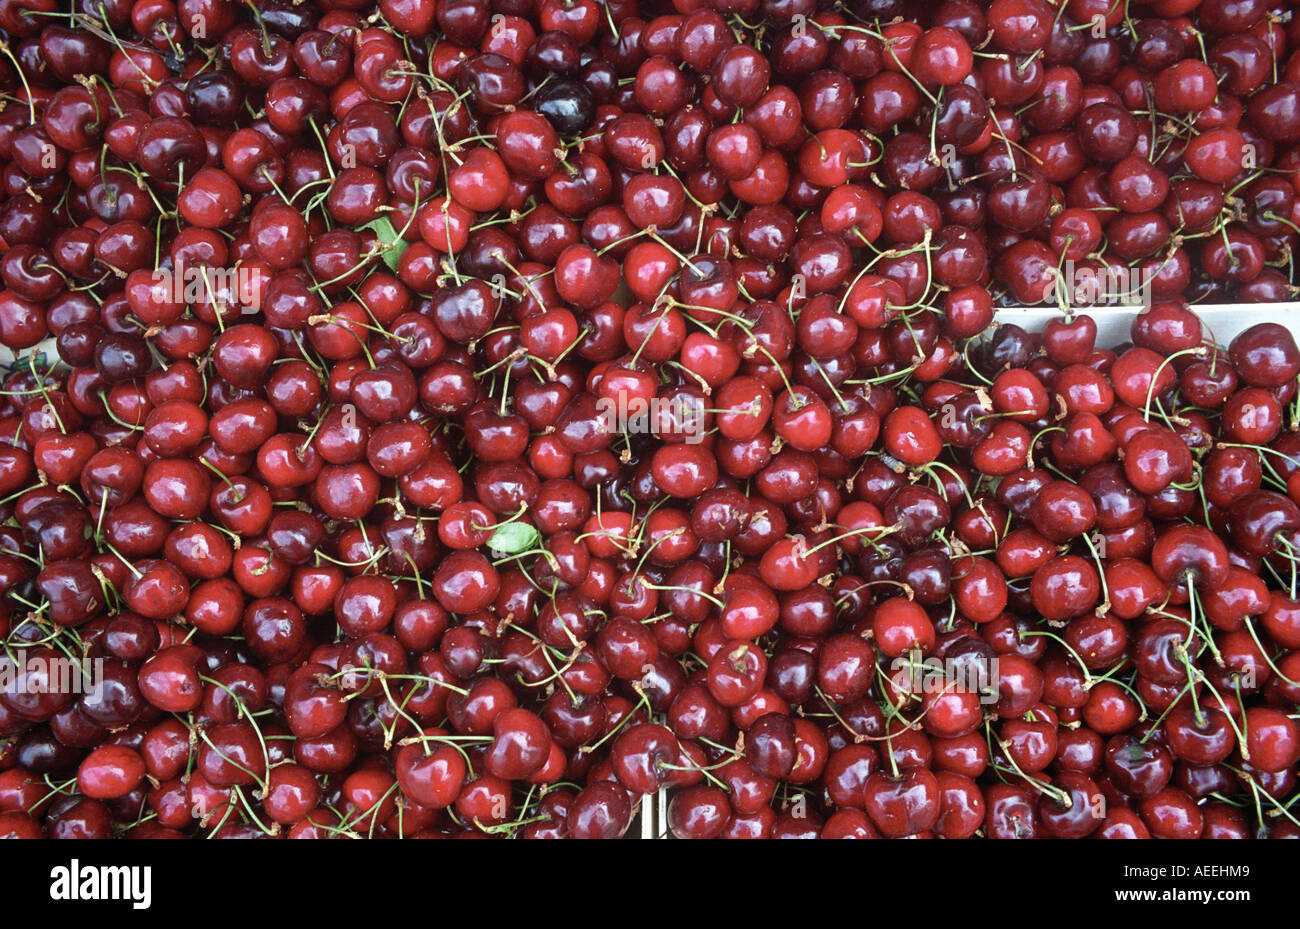 cherries at a market stall Stock Photo